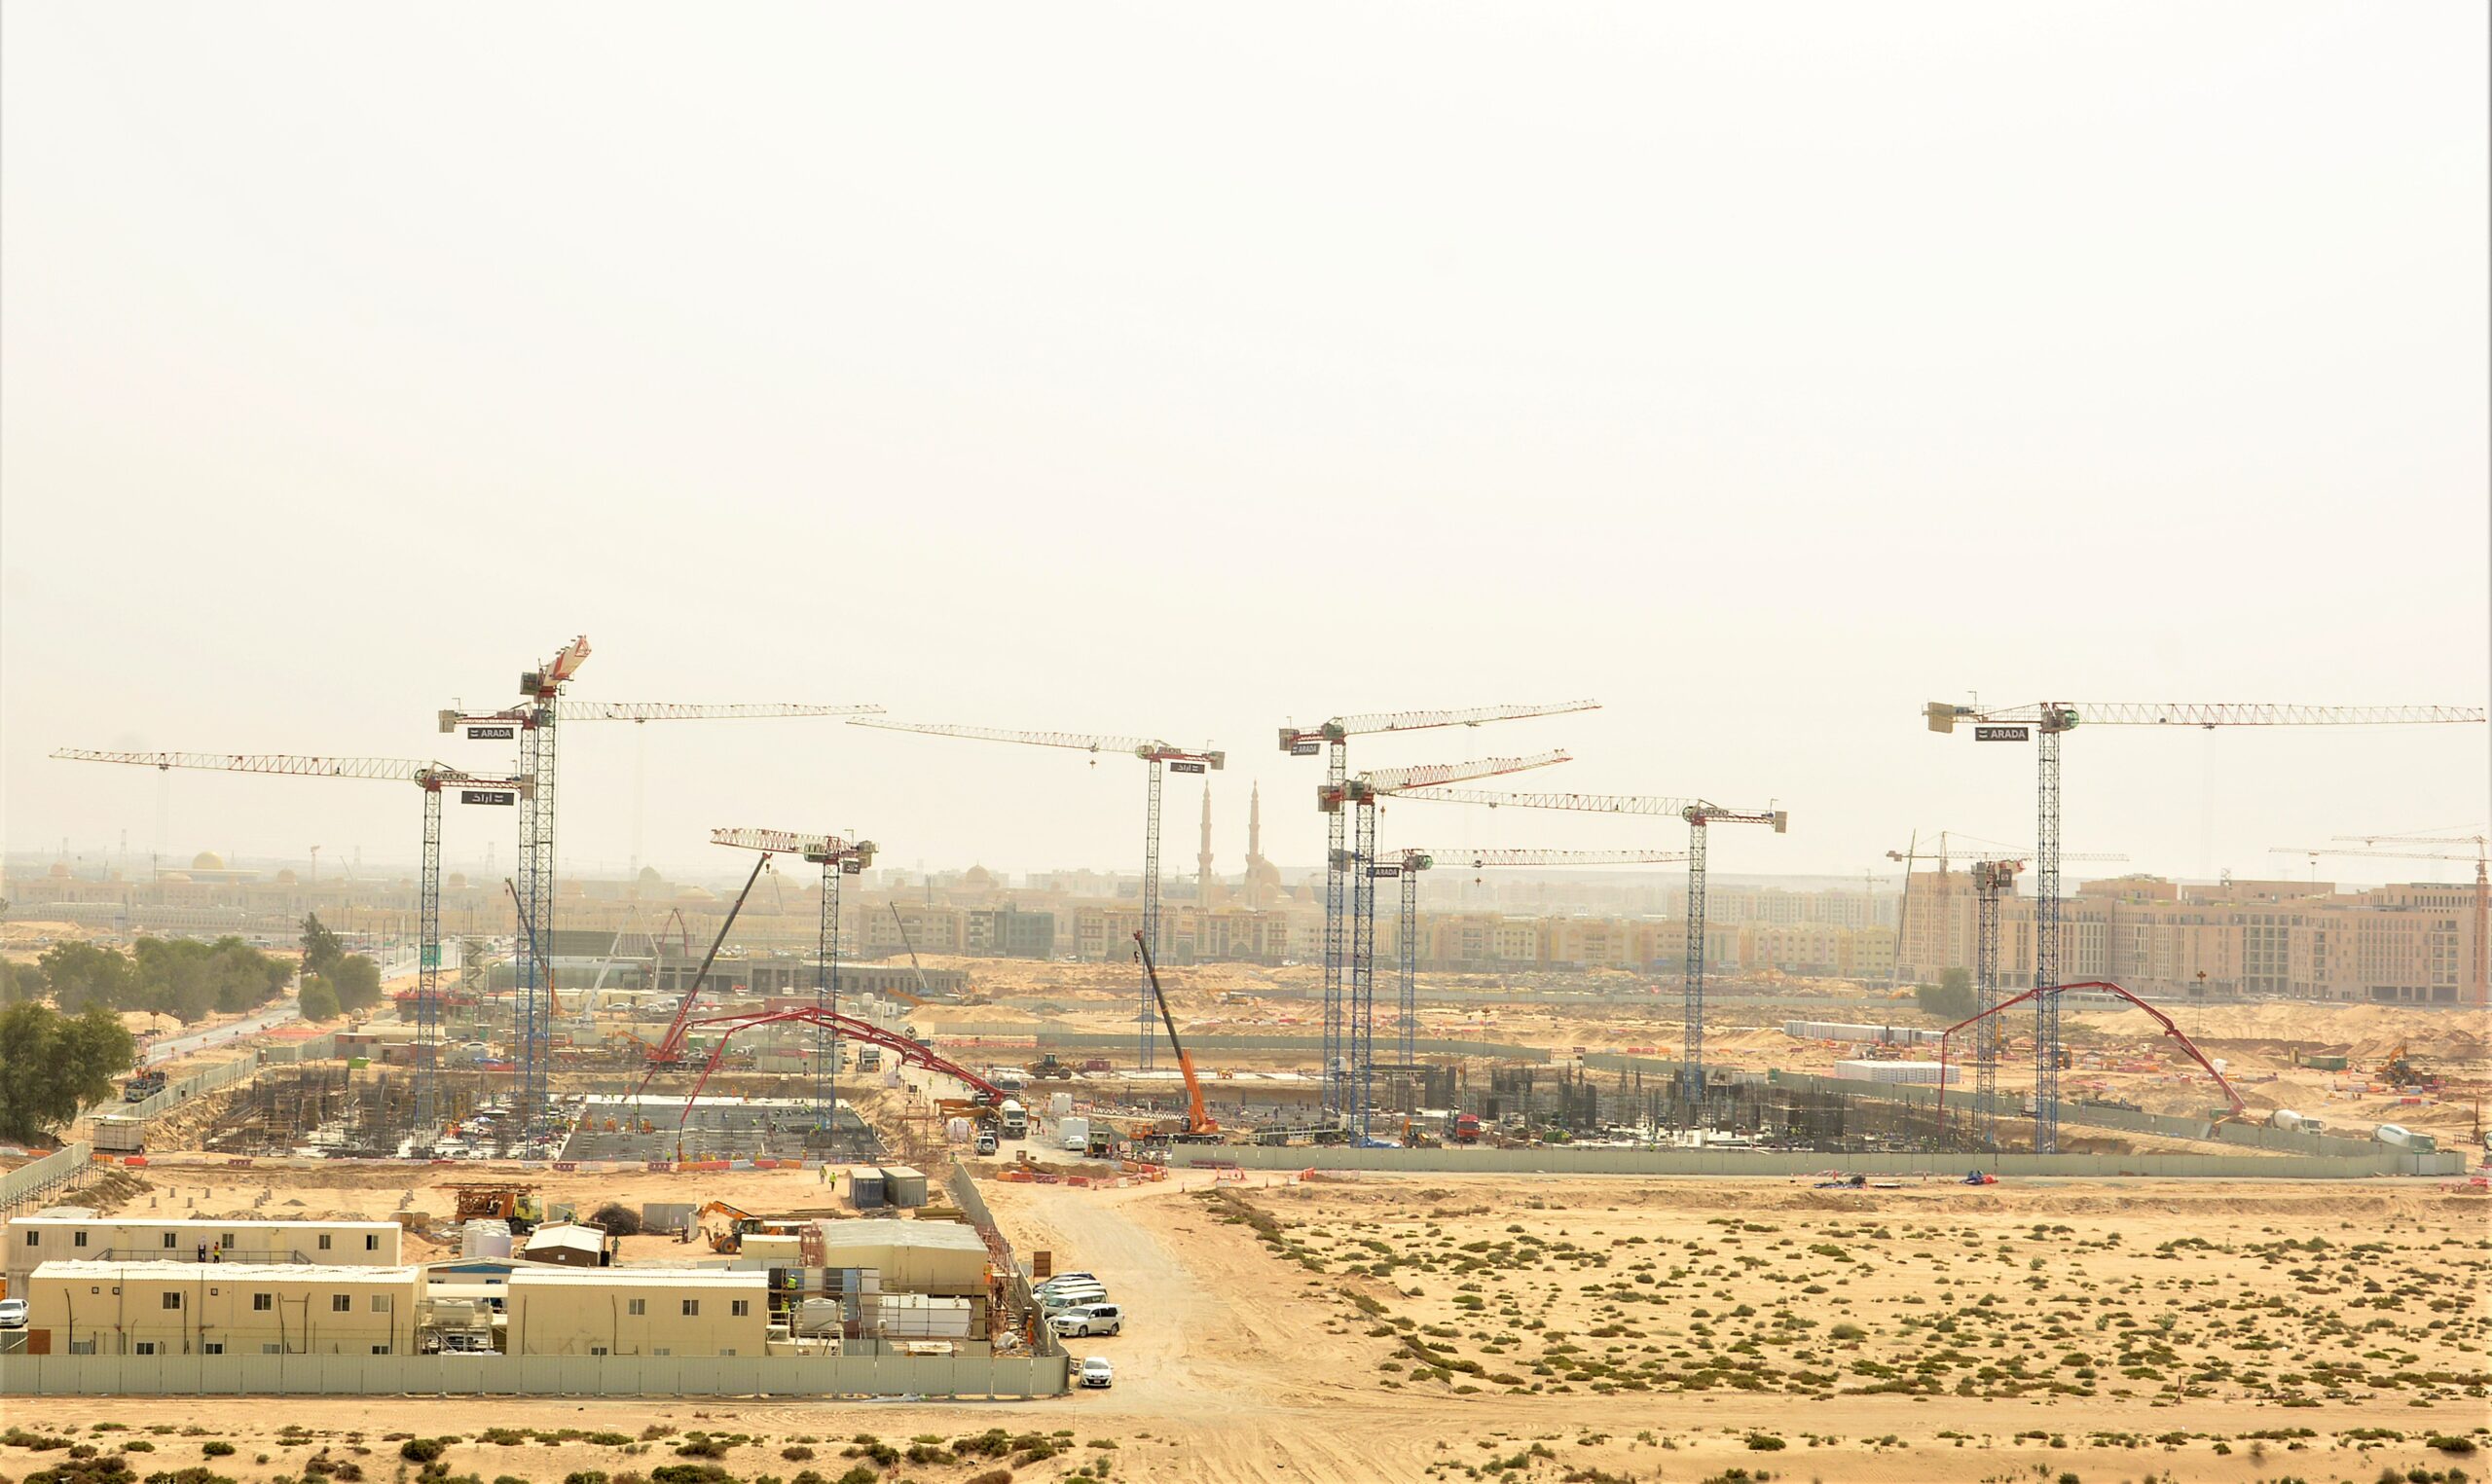 Raimondi Middle East erects eleven flat-top tower cranes for the costruction of East Village at Aljada, Sharjah